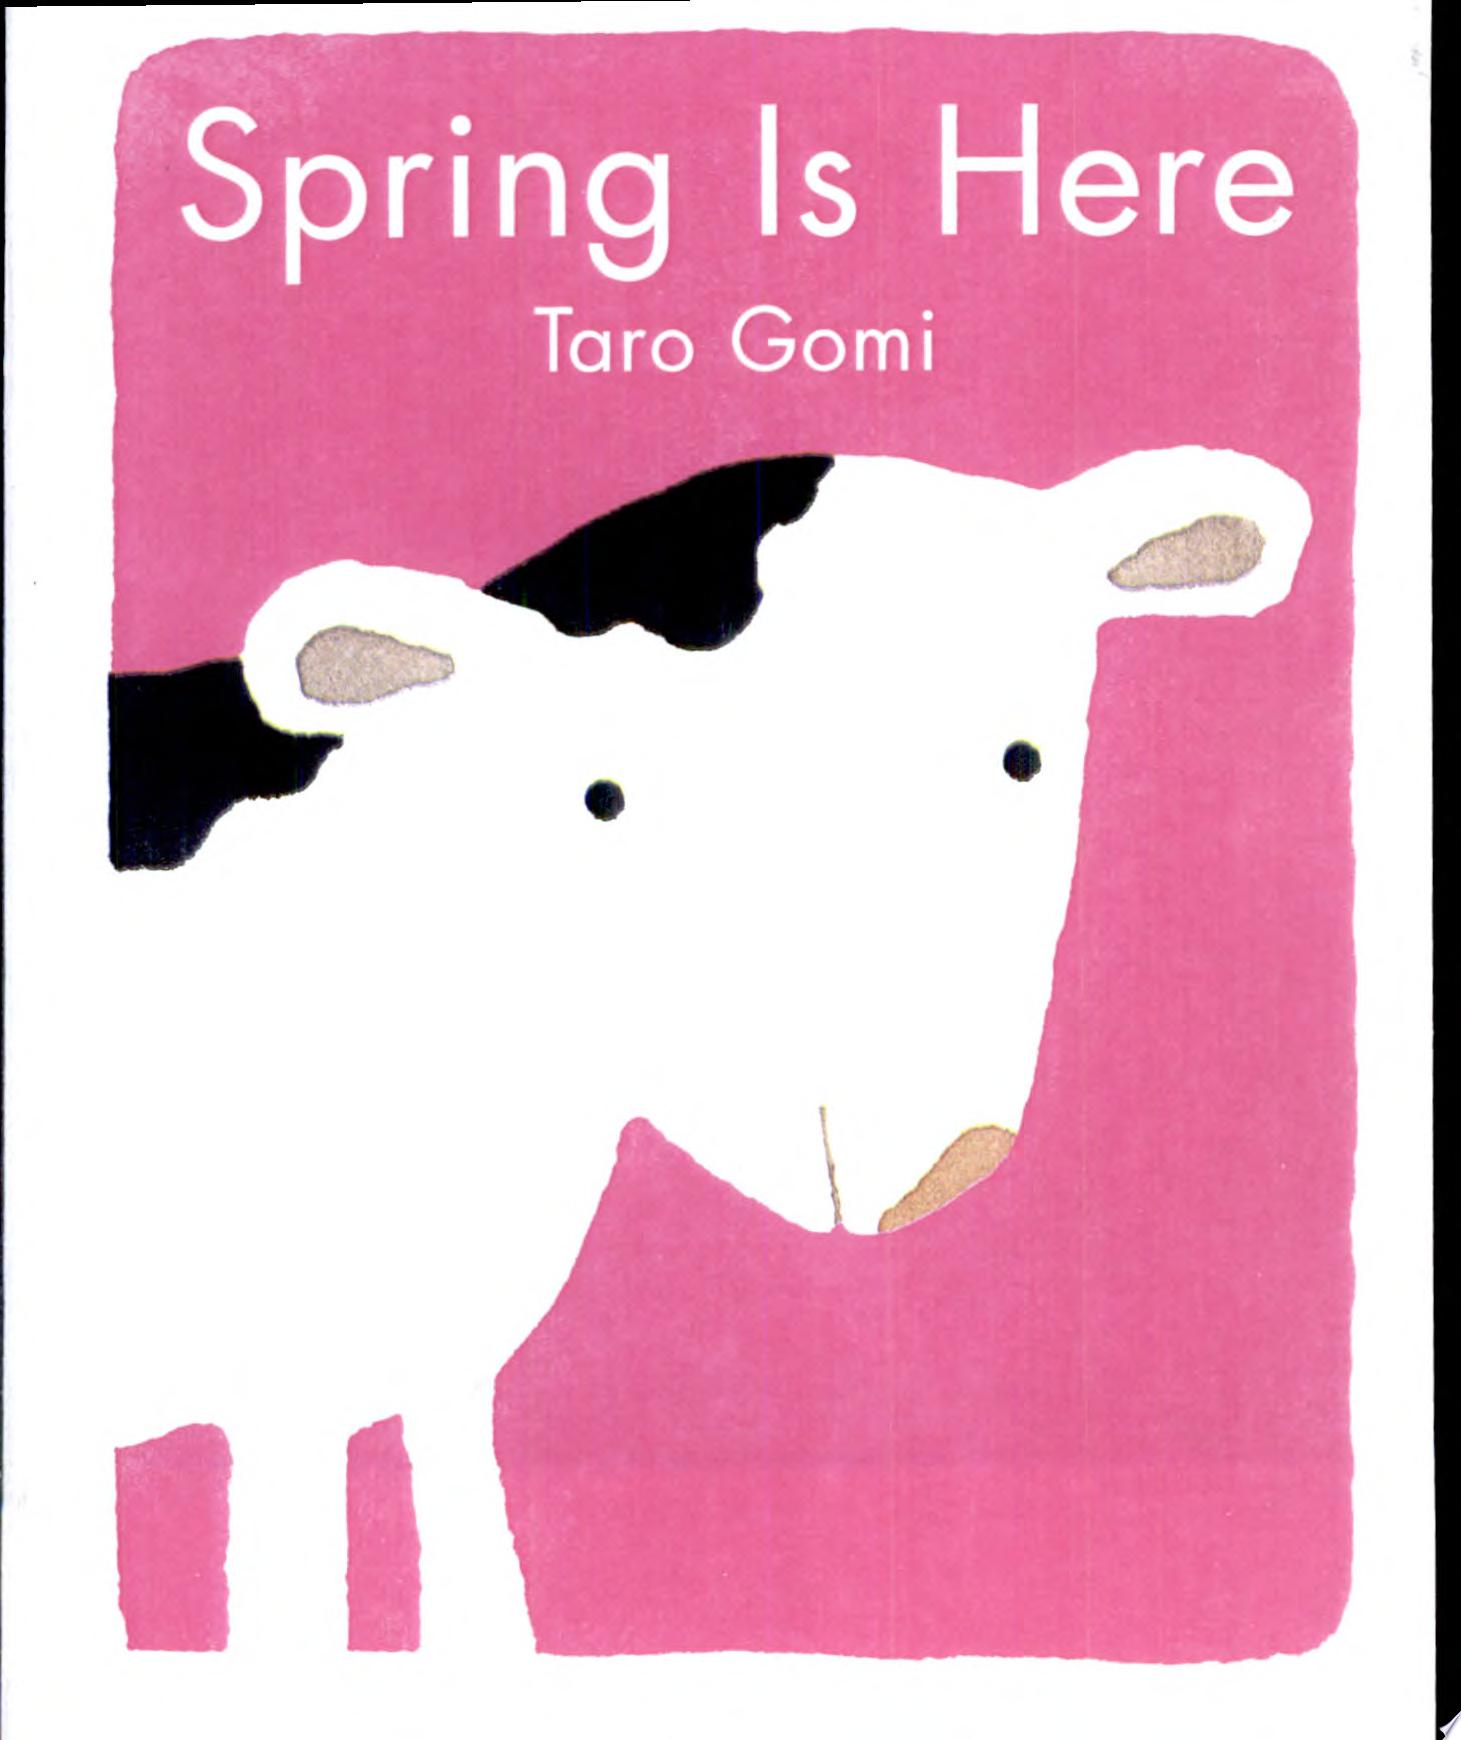 Image for "Spring is Here"